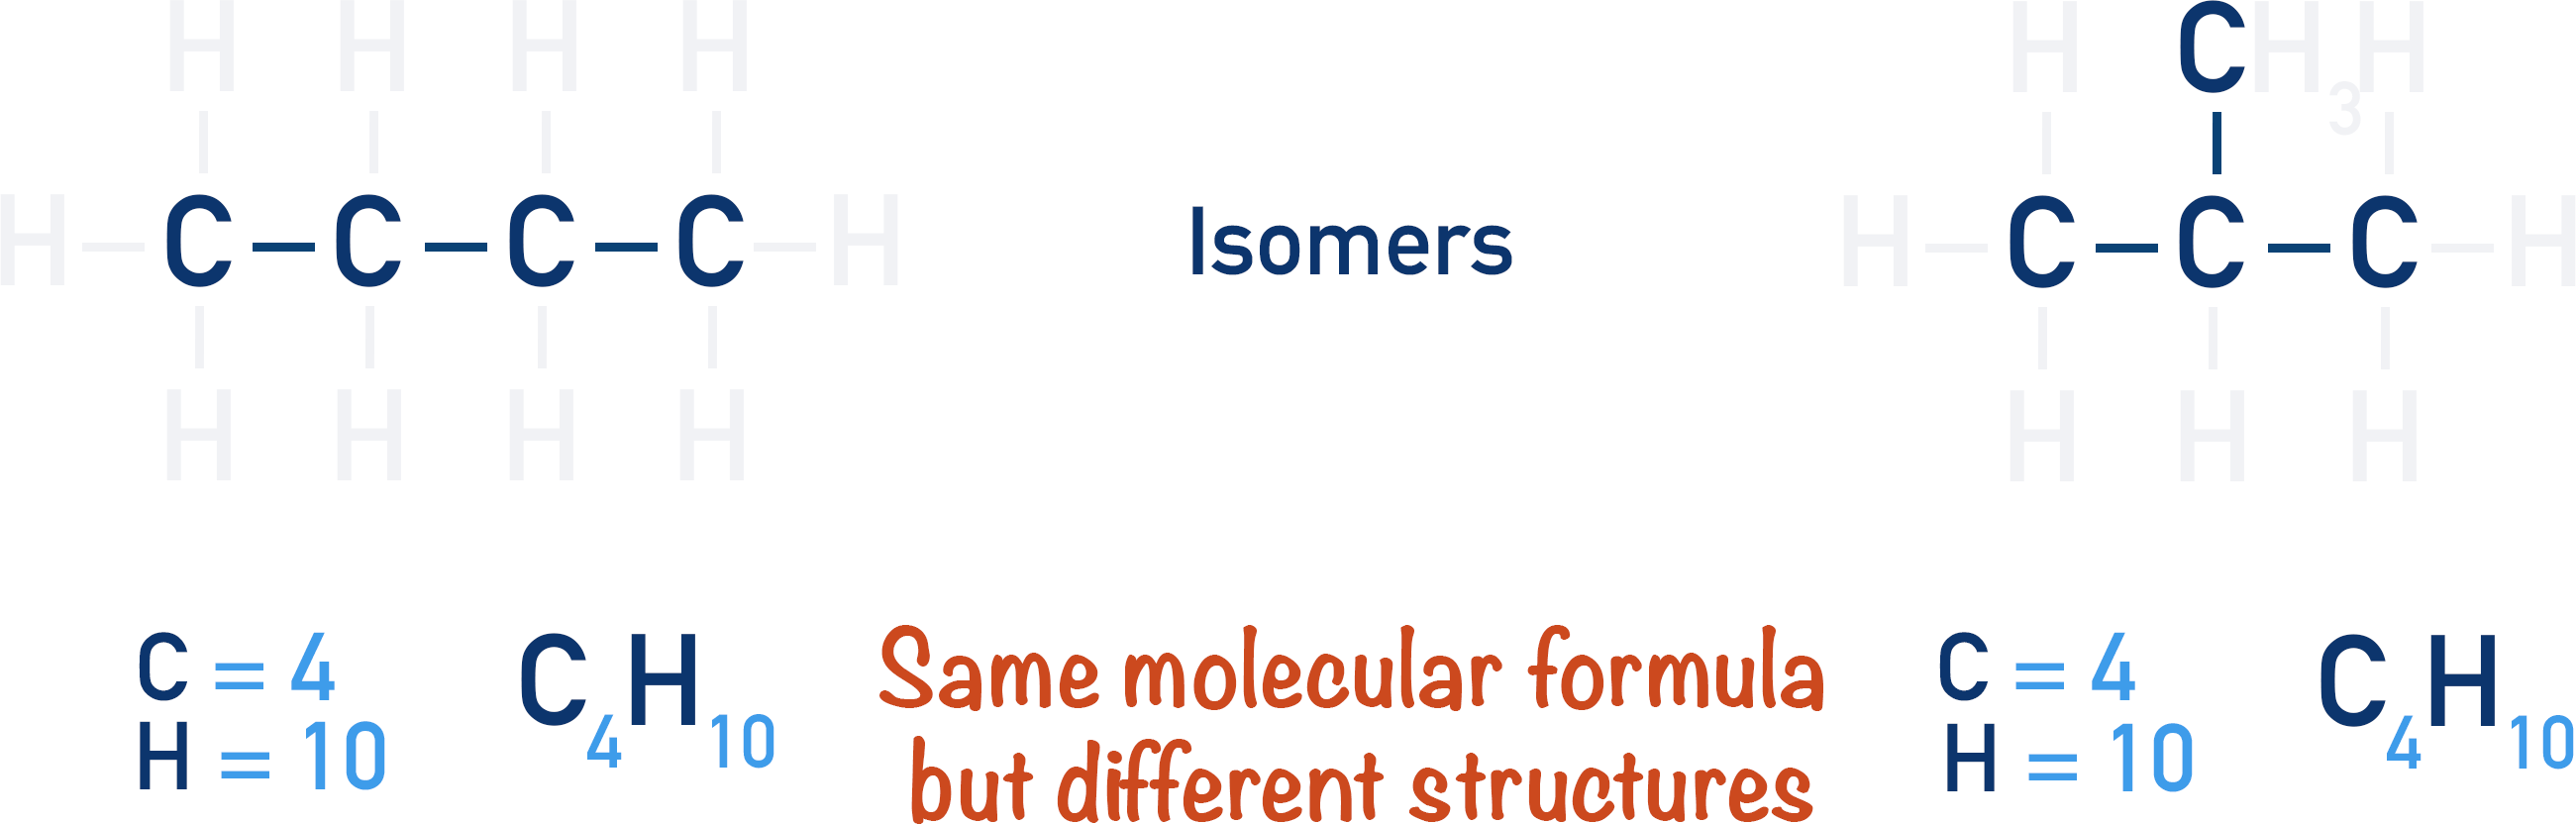 isomers chain isomerism hydrocarbon molecular formula structural formula